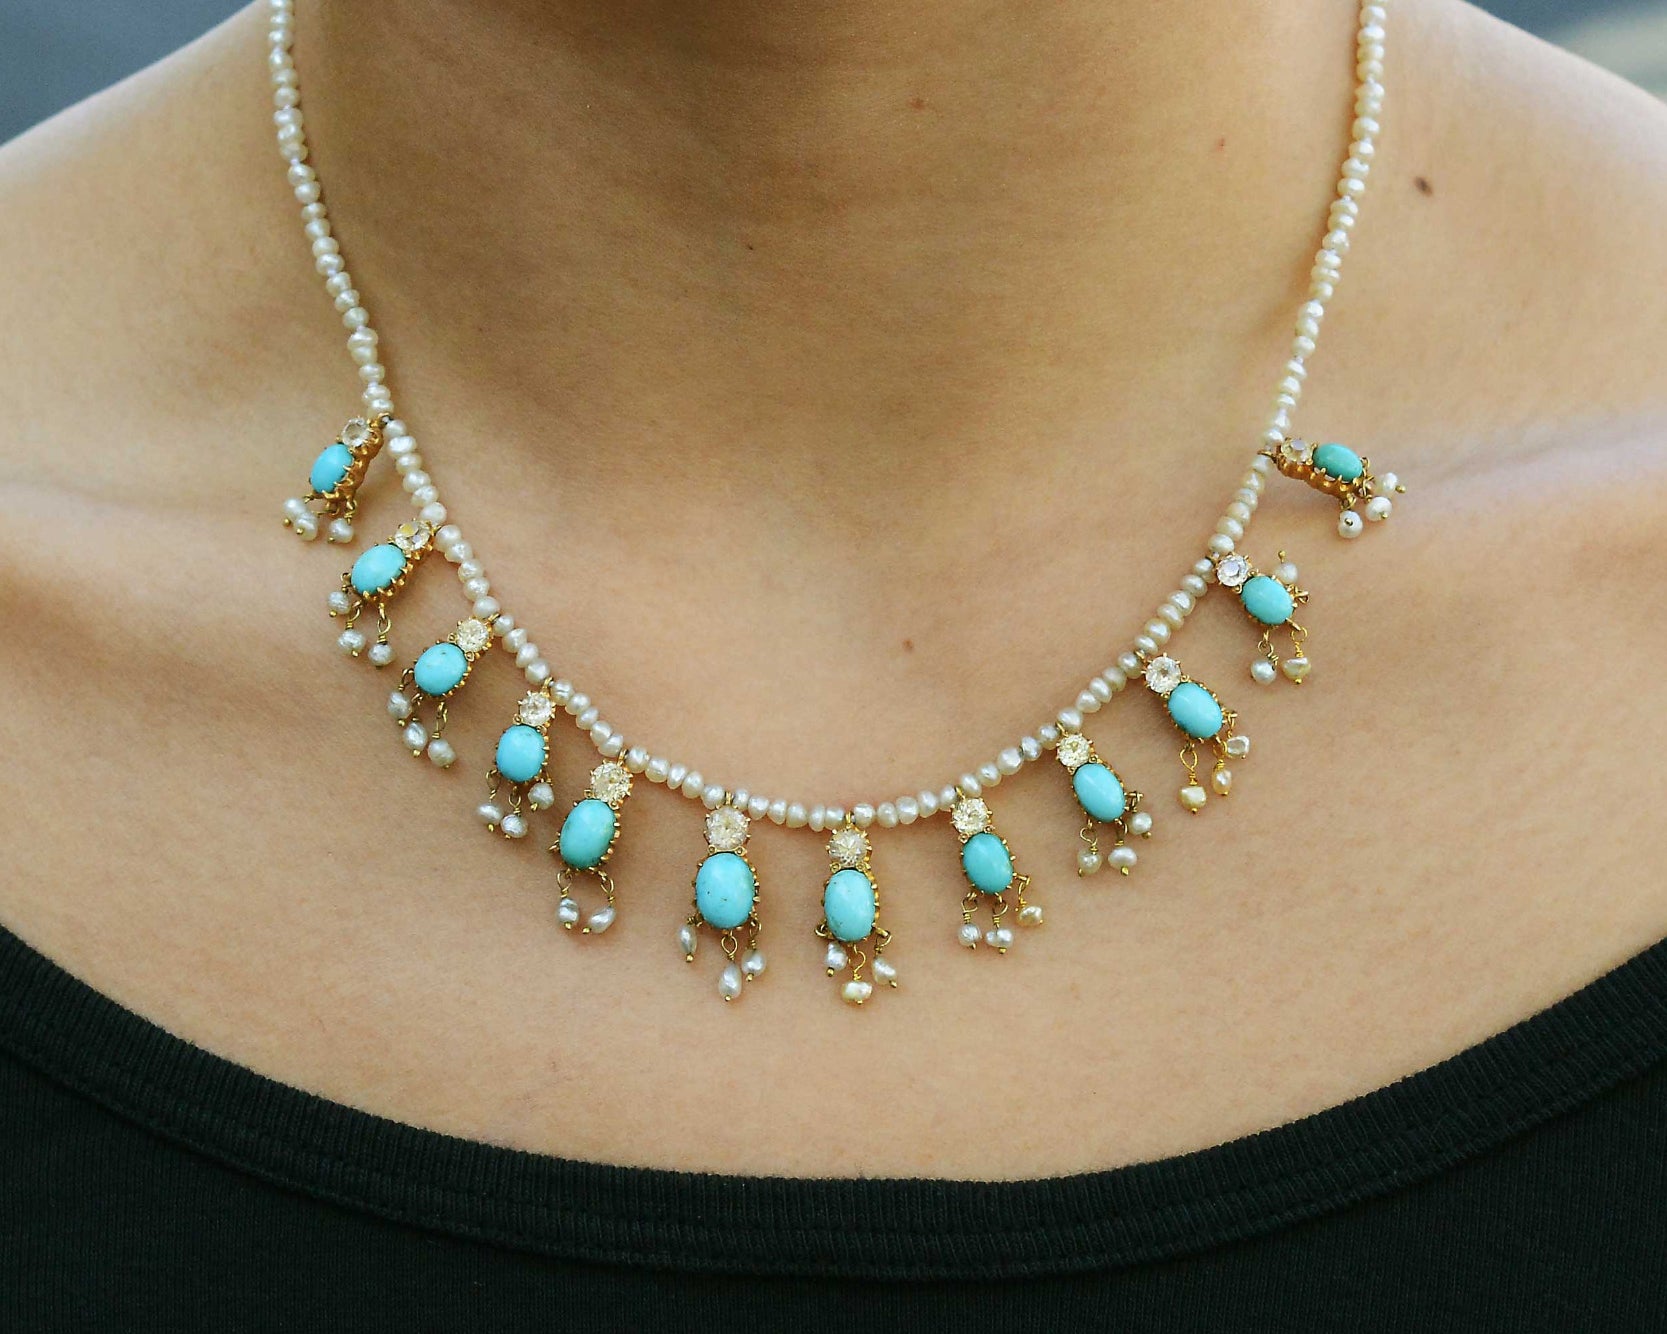 French Belle Époque Turquoise and Seed Pearl Fringe Necklace